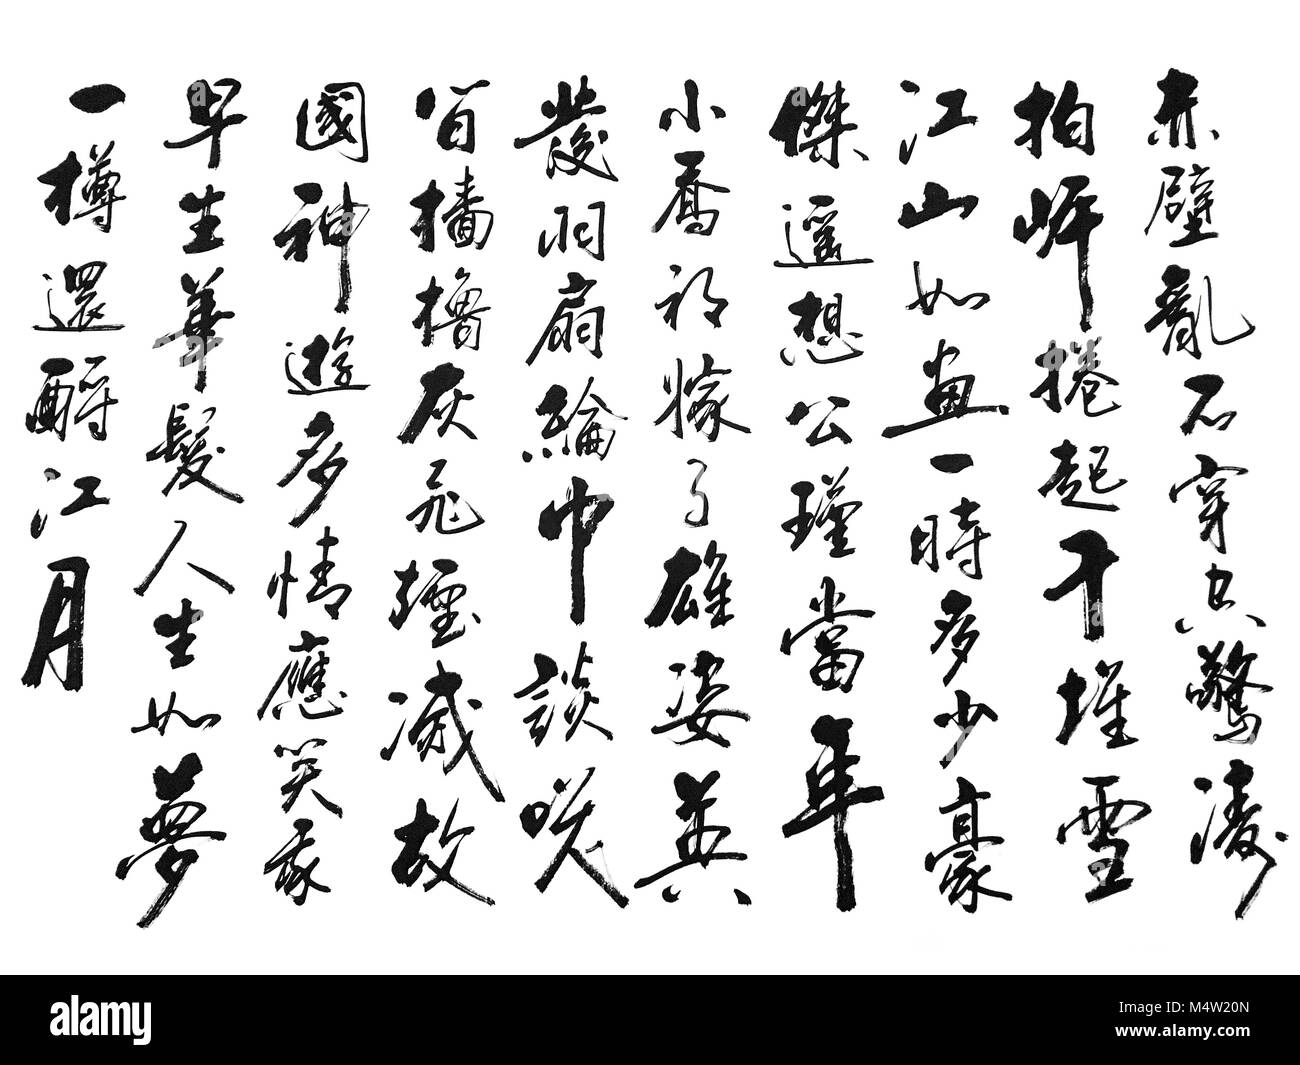 A picture of a paper with many traditional Chinese symbols written by a calligraphy technique. Stock Photo